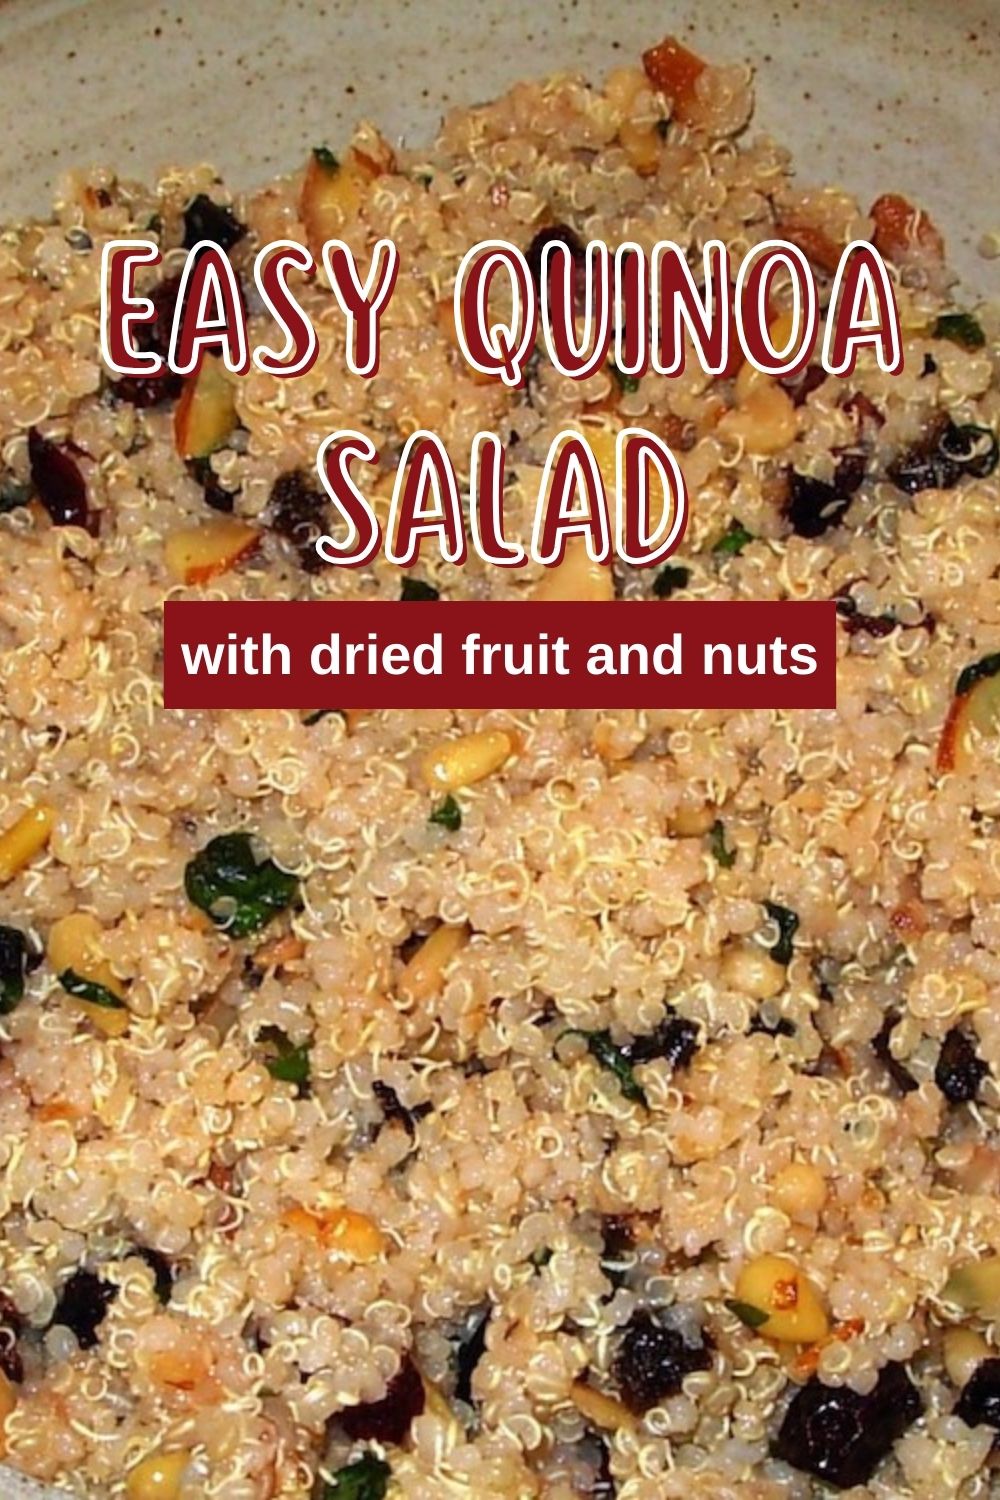 Easy quinoa salad with dried fruit and nuts.